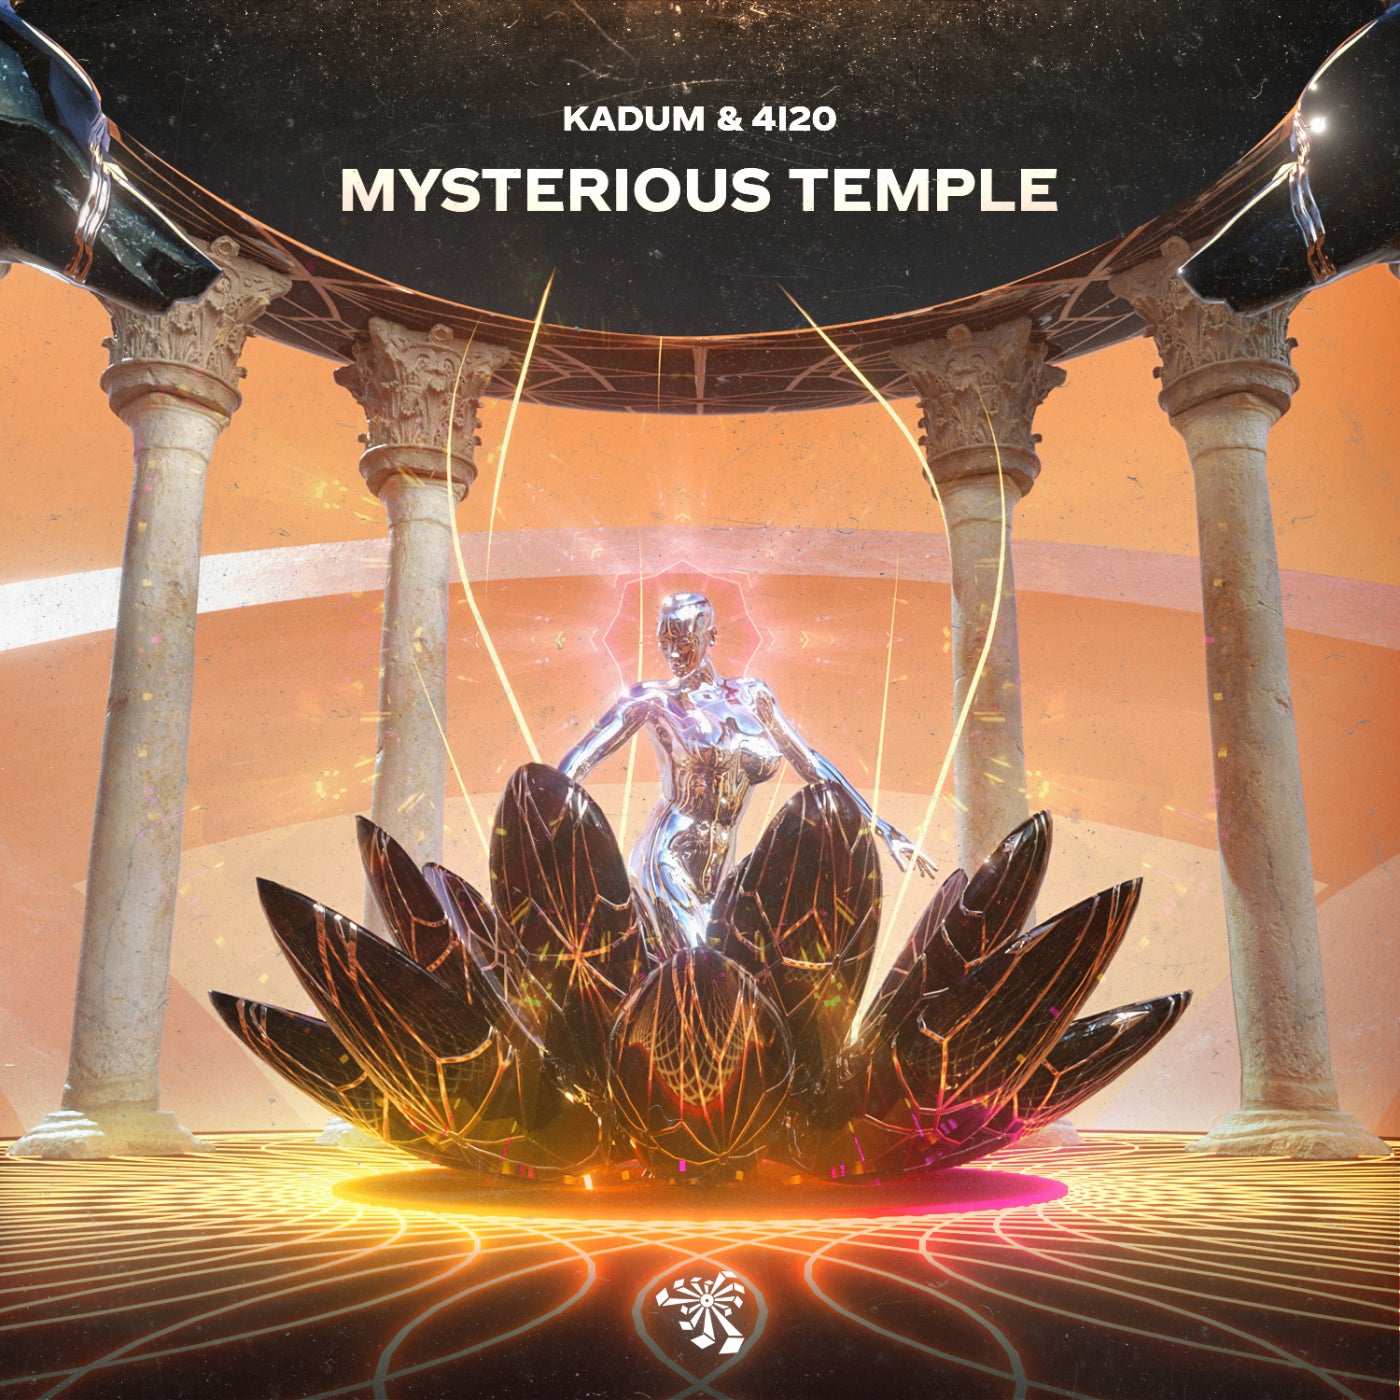 Mysterious Temple